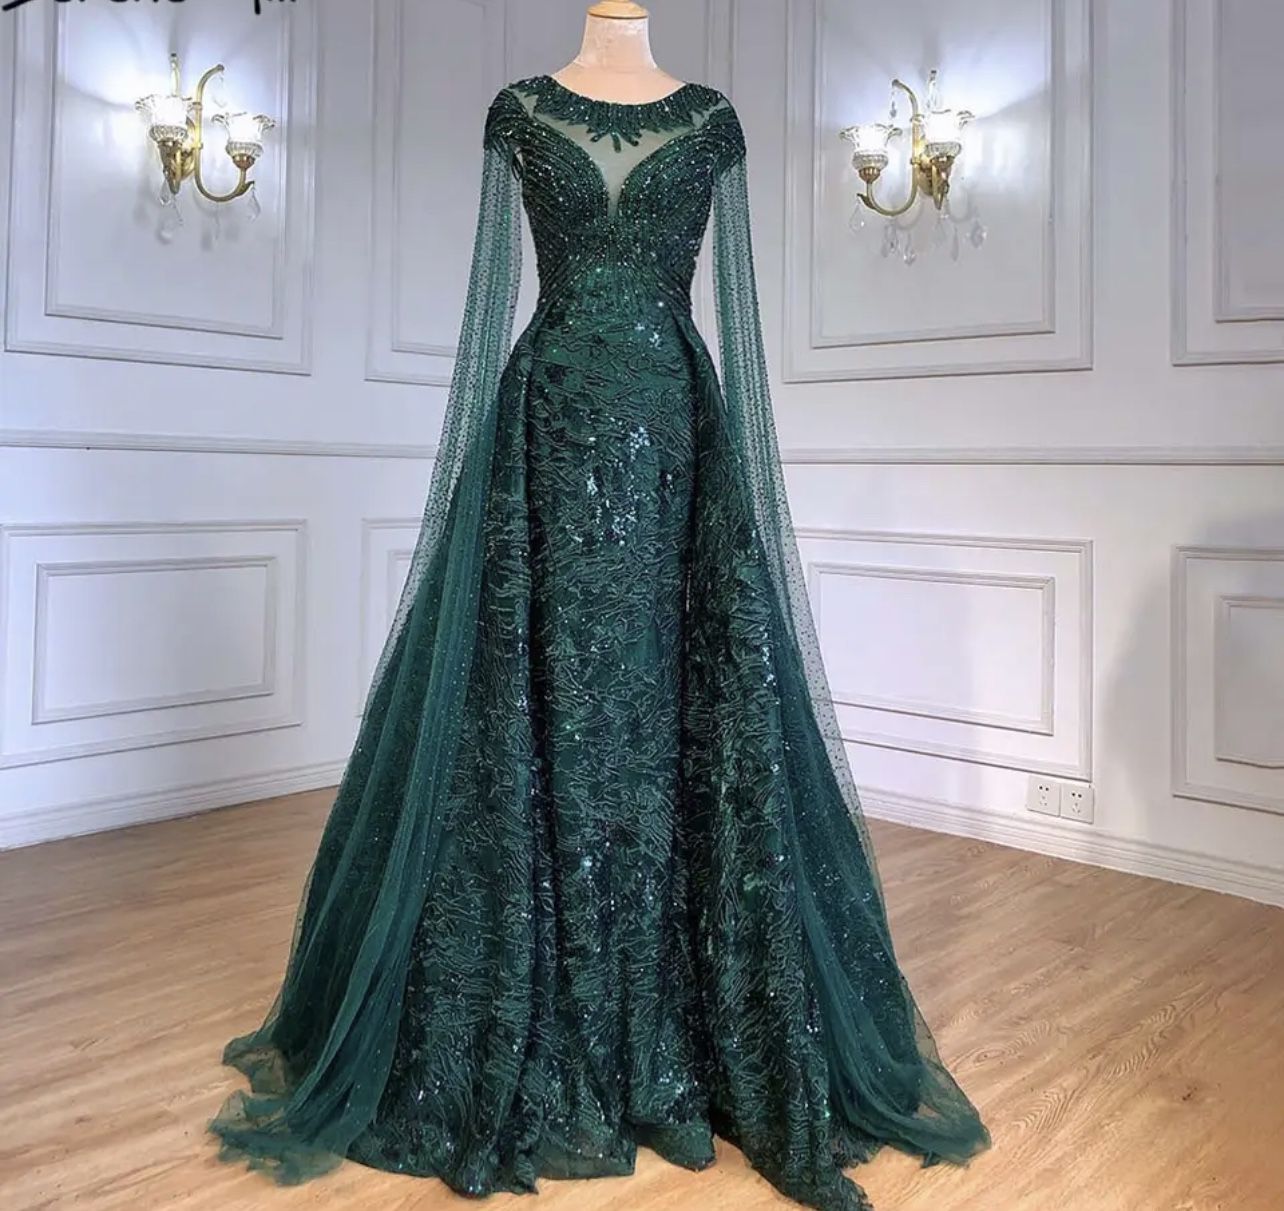 engagement Or Party Dress